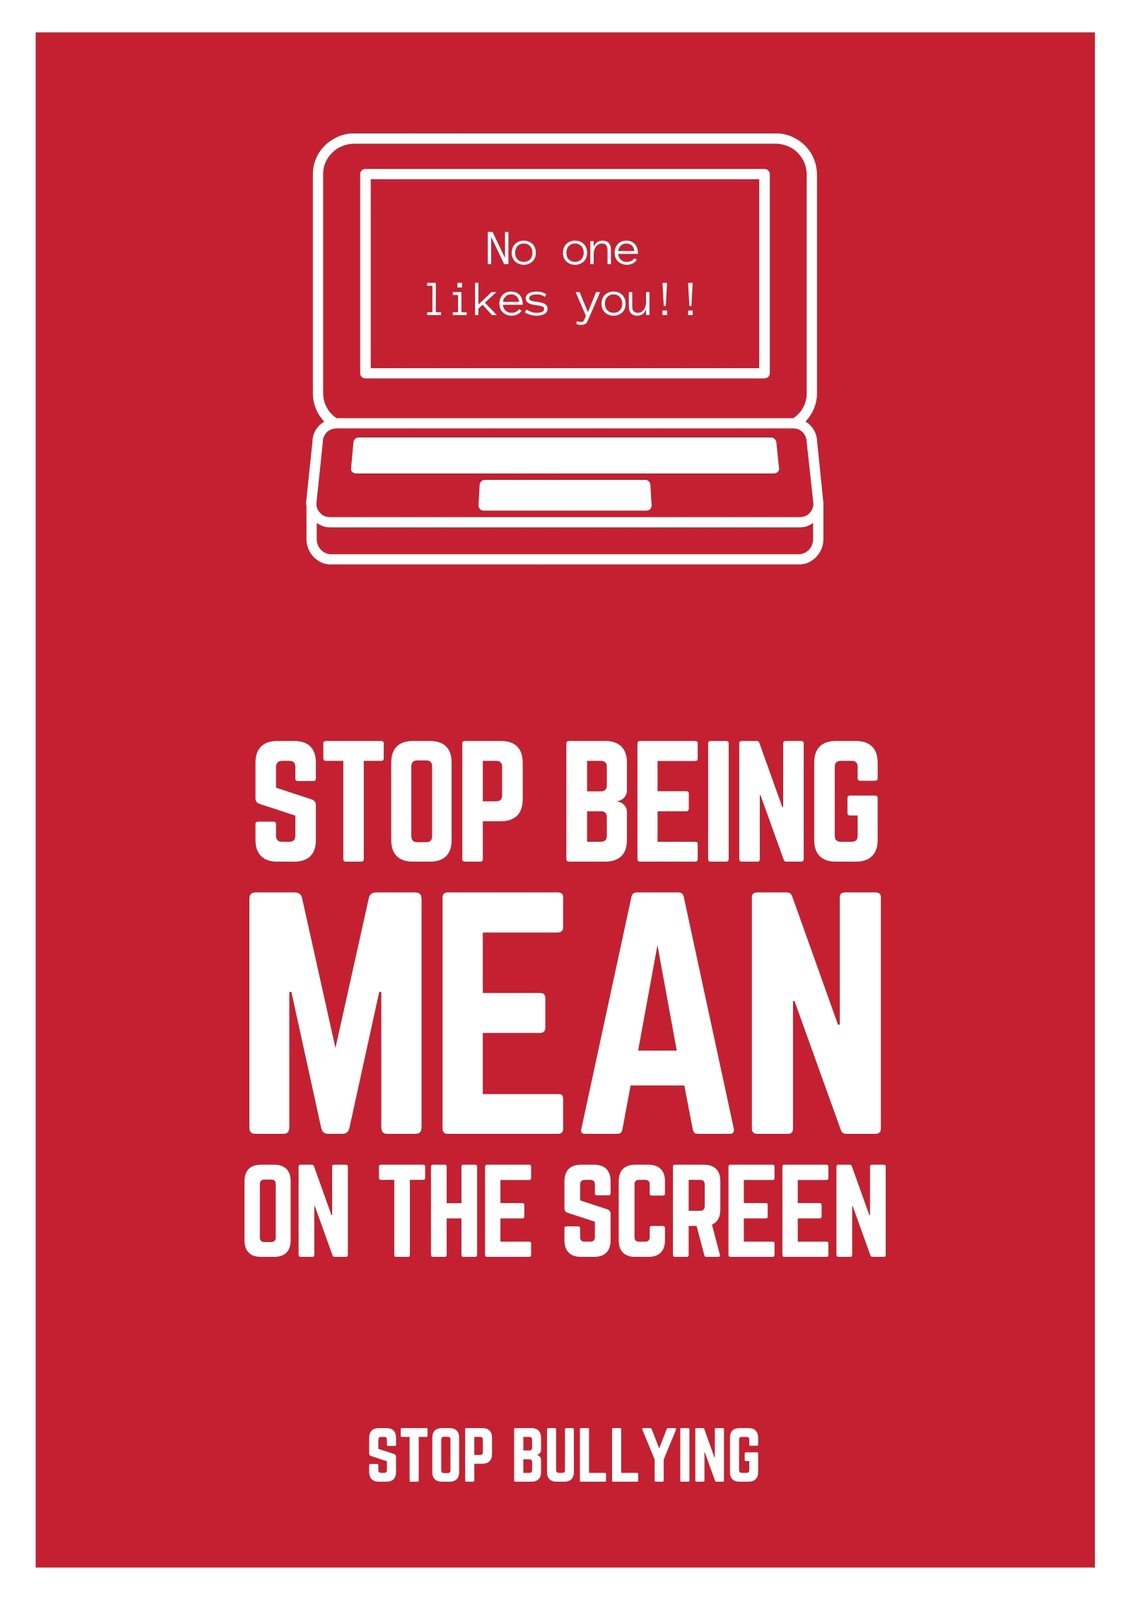 anti cyber bullying posters